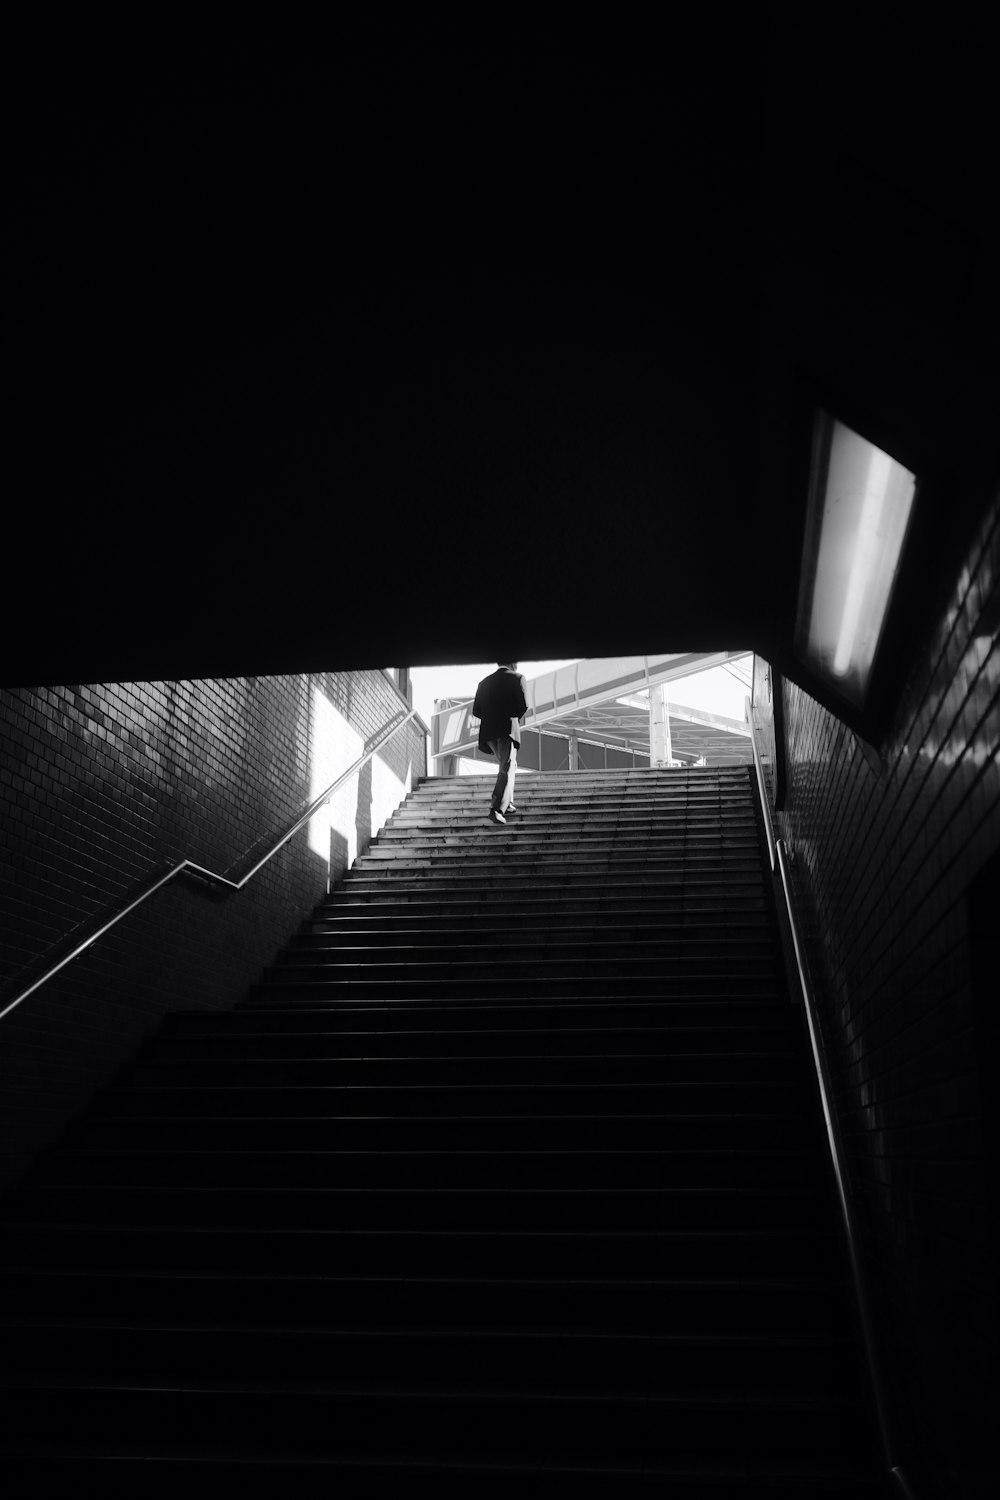 person walking on the stairs